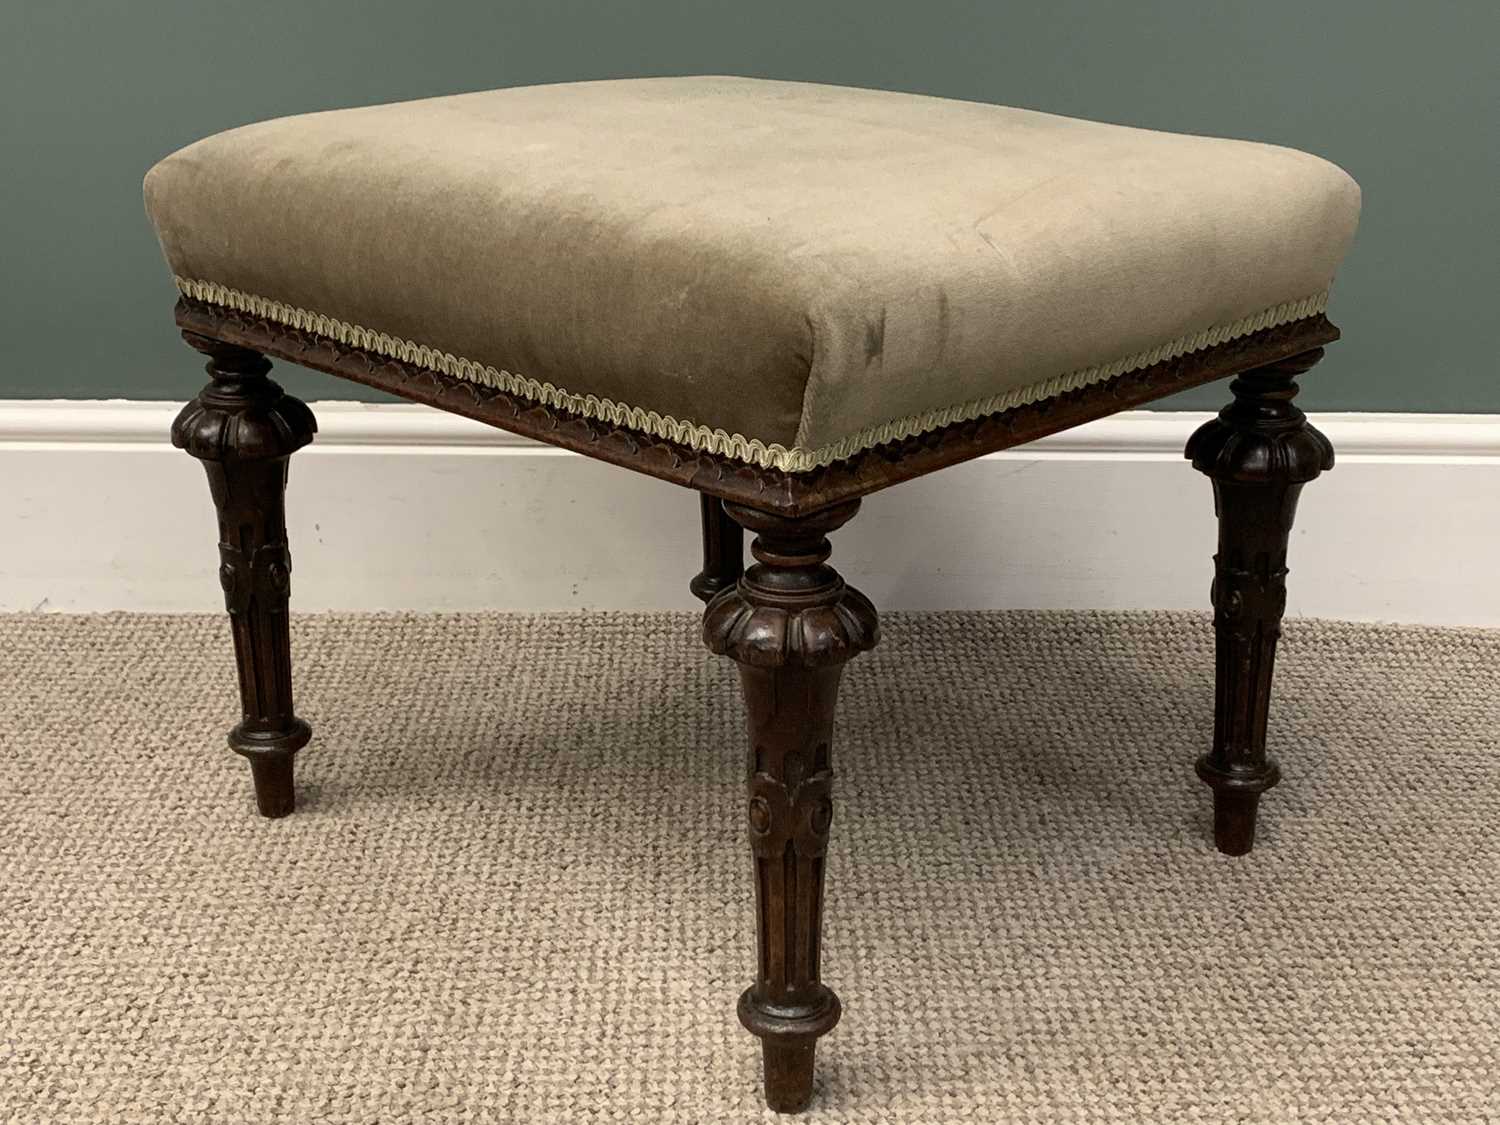 THREE VINTAGE UPHOLSTERED FOOT & OTHER STOOLS / INLAID MAHOGANY BEDROOM CHAIR Provenance: Private - Image 5 of 5